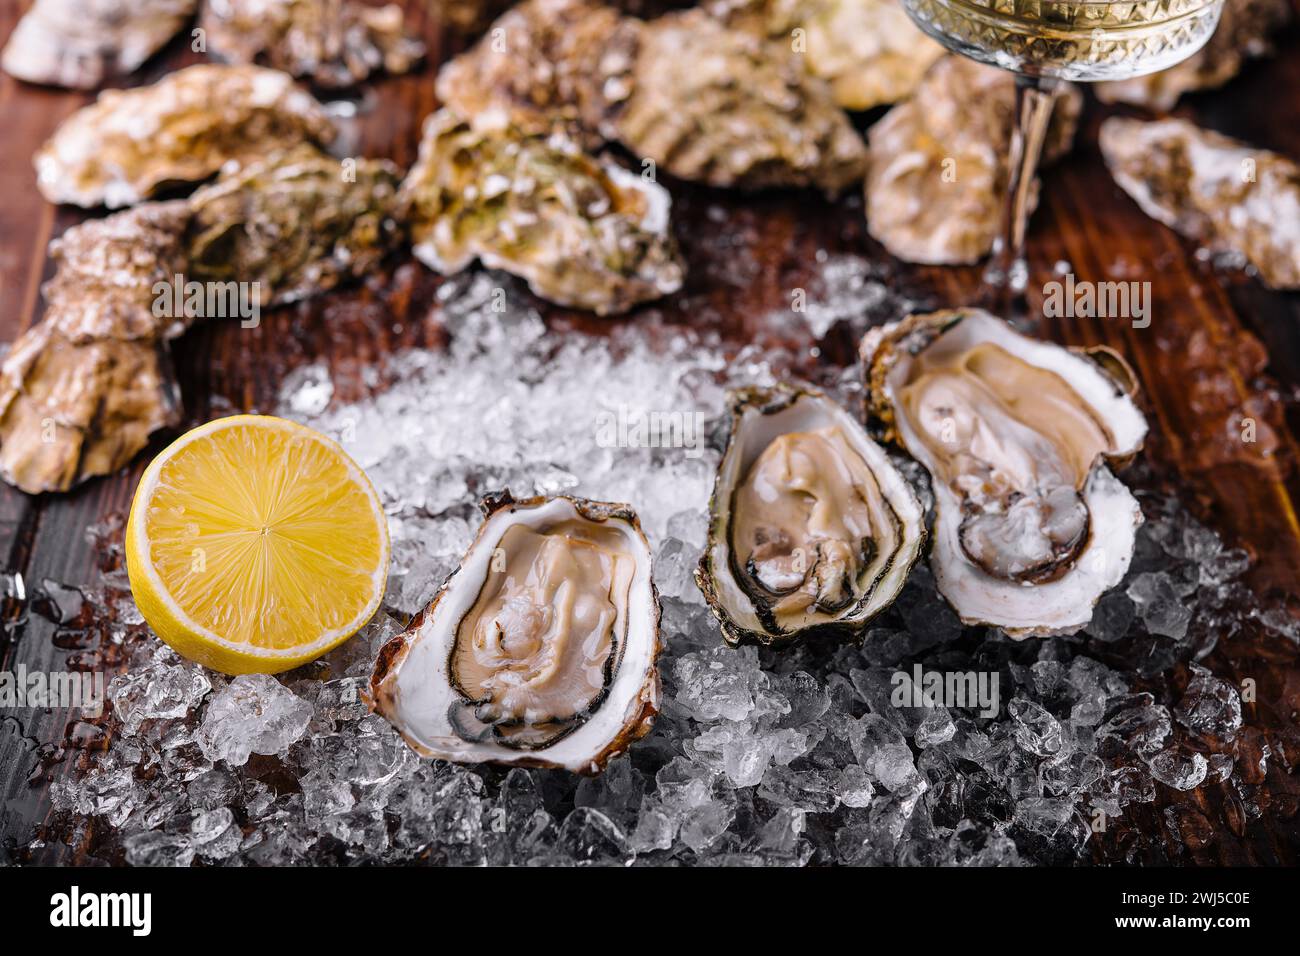 Opened oysters, ice and lemon on board Stock Photo